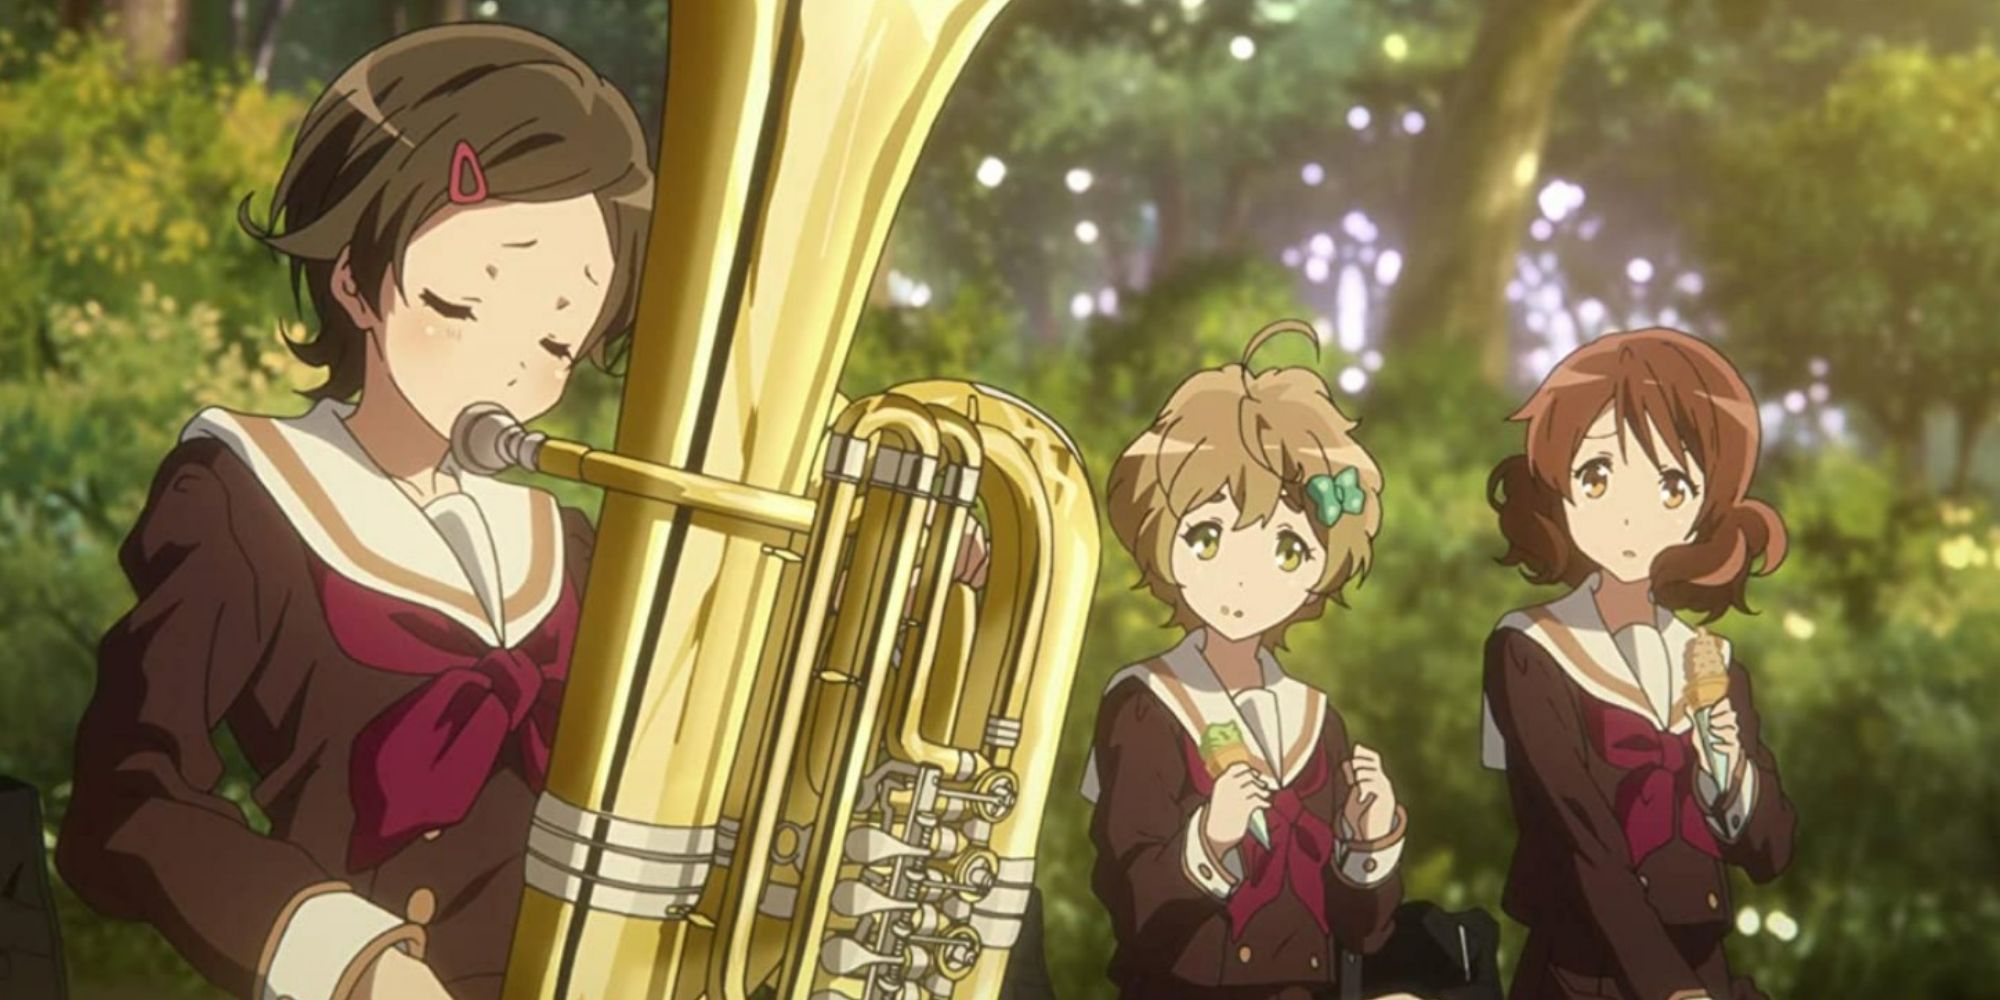 Girl playing instrument as two friends look on in Hibike! Euphonium anime